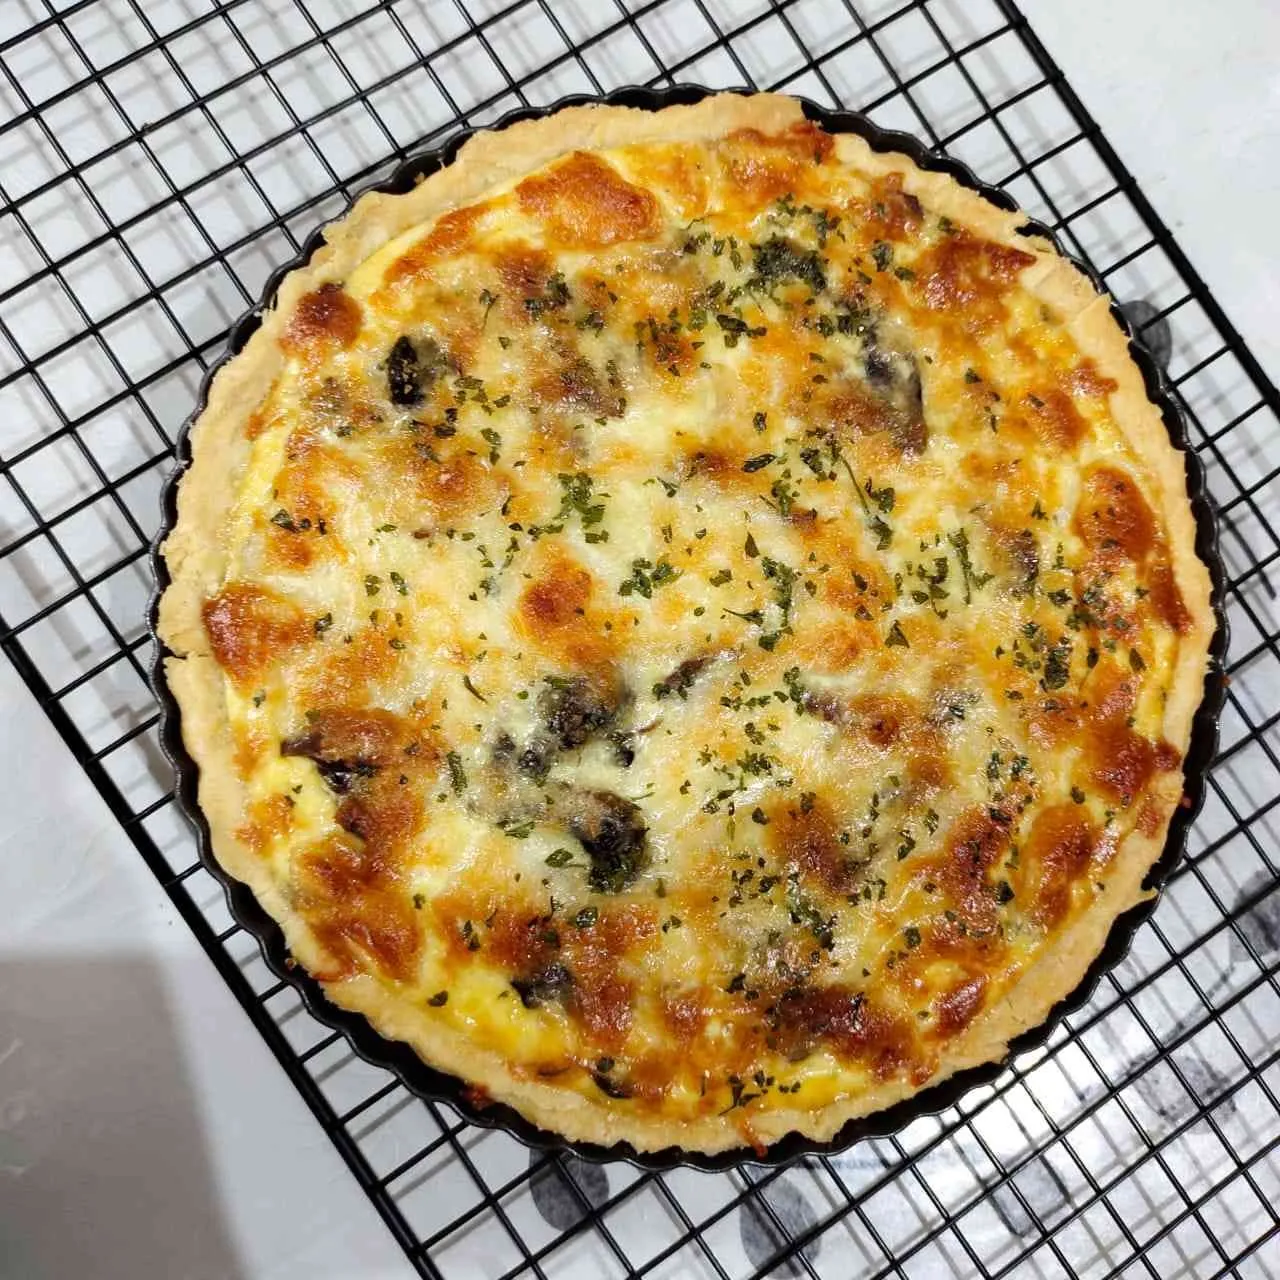 Smoked Beef & Cheese Quiche